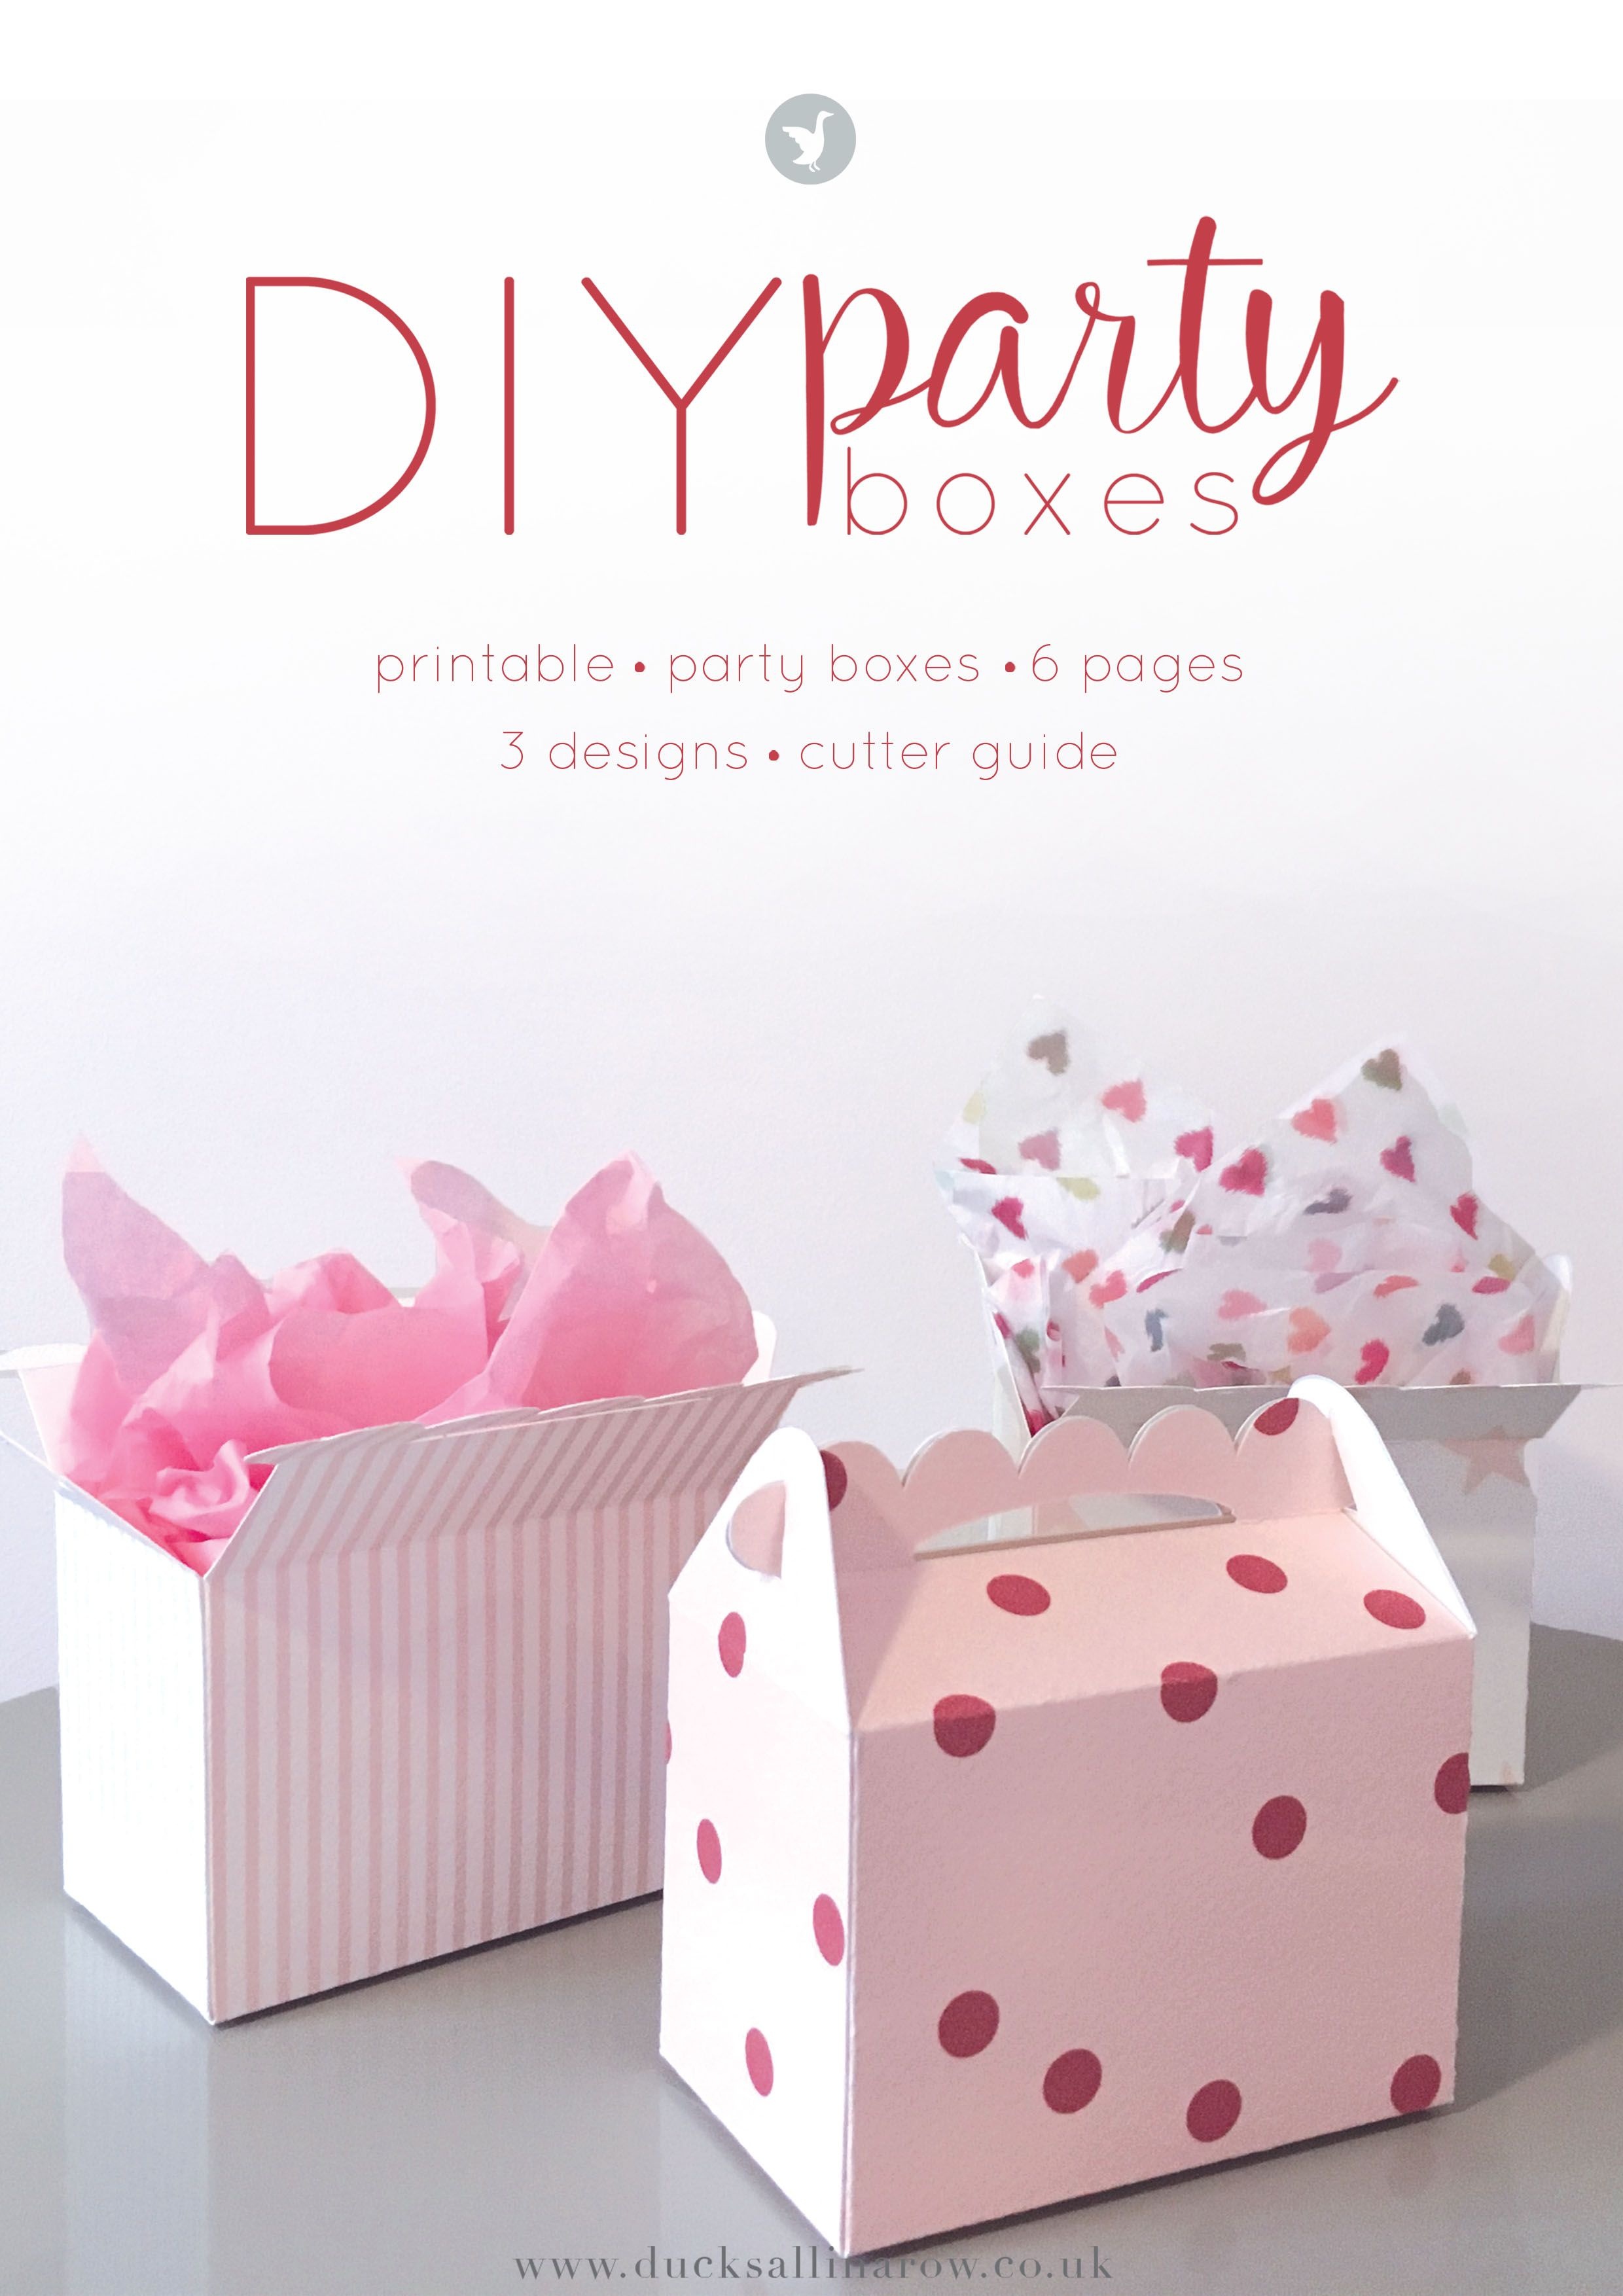 Adorable Diy Party Boxes - Free Printables | Gift Wrapping Ideas - Printable Box Templates Free Download